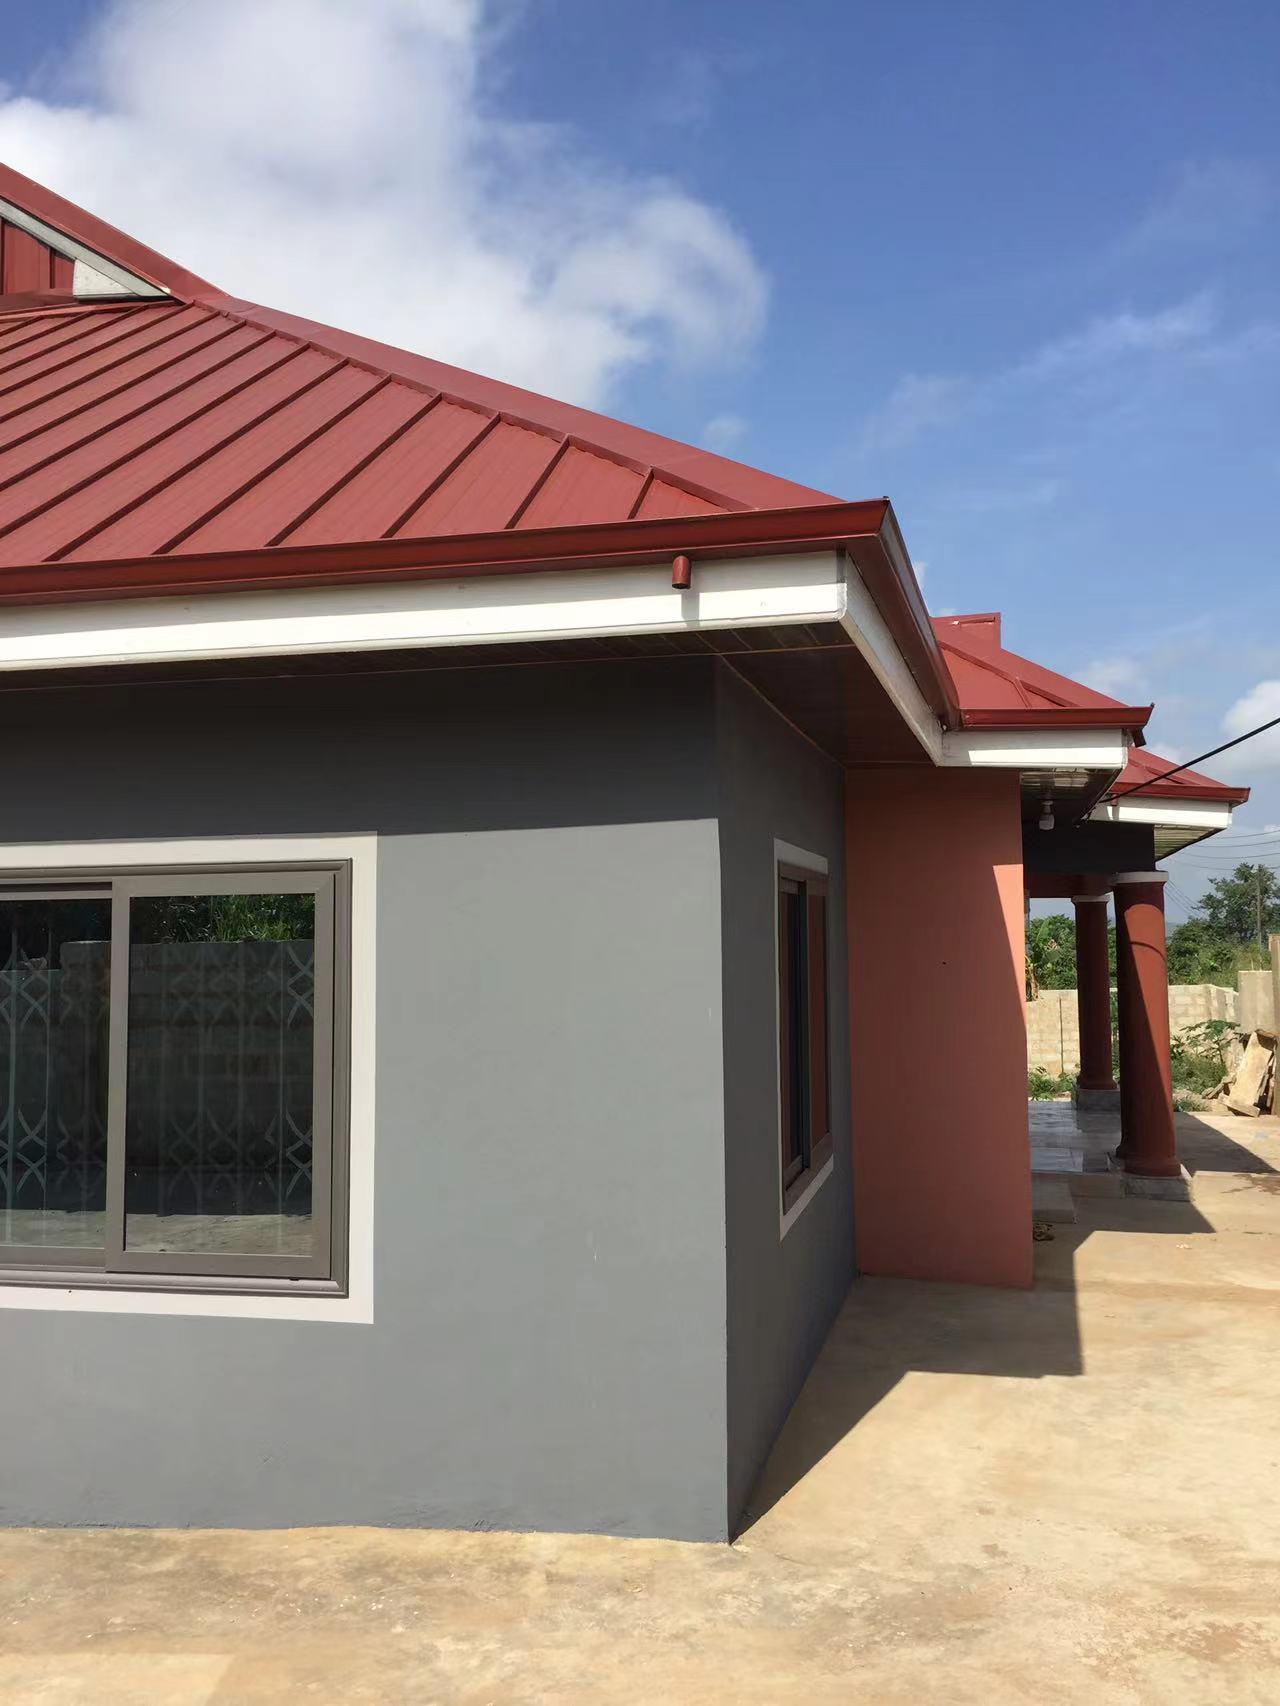 Newly Built Four 4-Bedroom House for Sale in Aburi